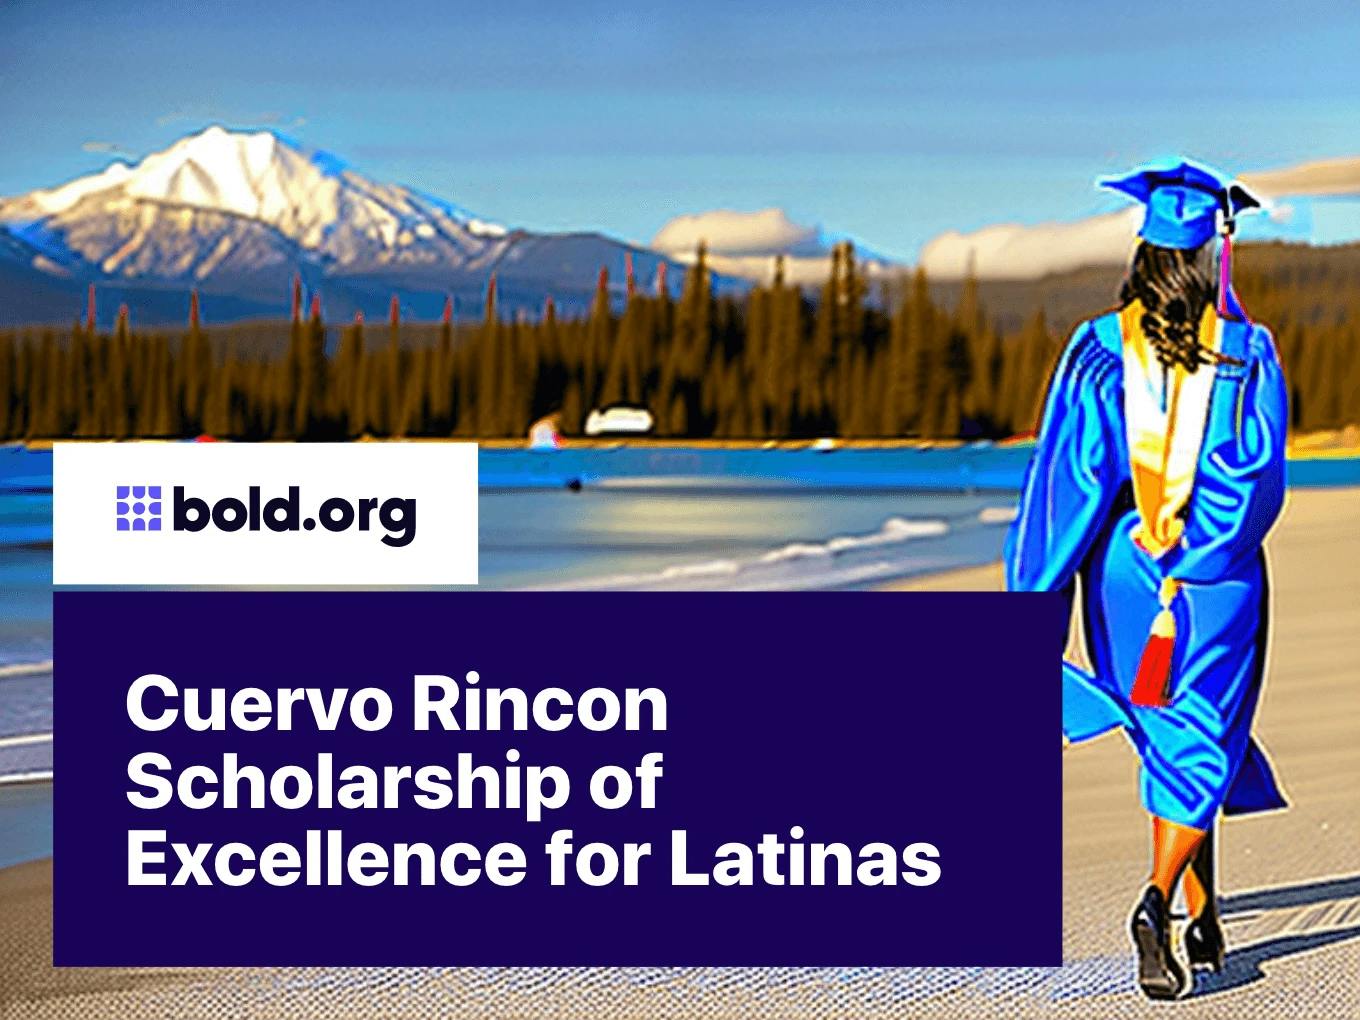 Cuervo Rincon Scholarship of Excellence for Latinas